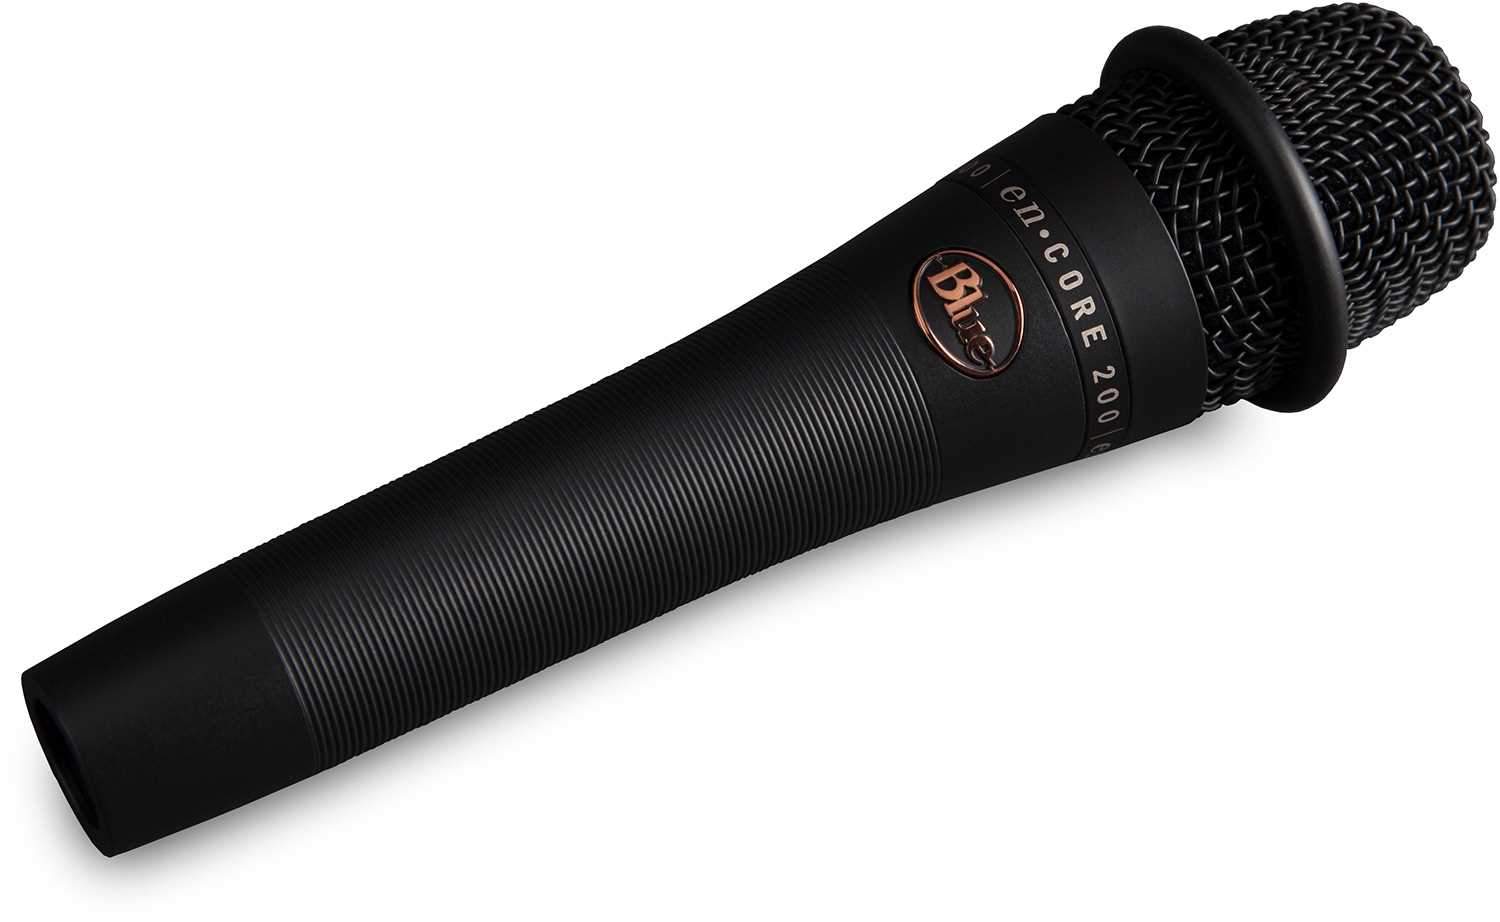 Blue enCore 200 Black Active Dynamic Microphone - ProSound and Stage Lighting